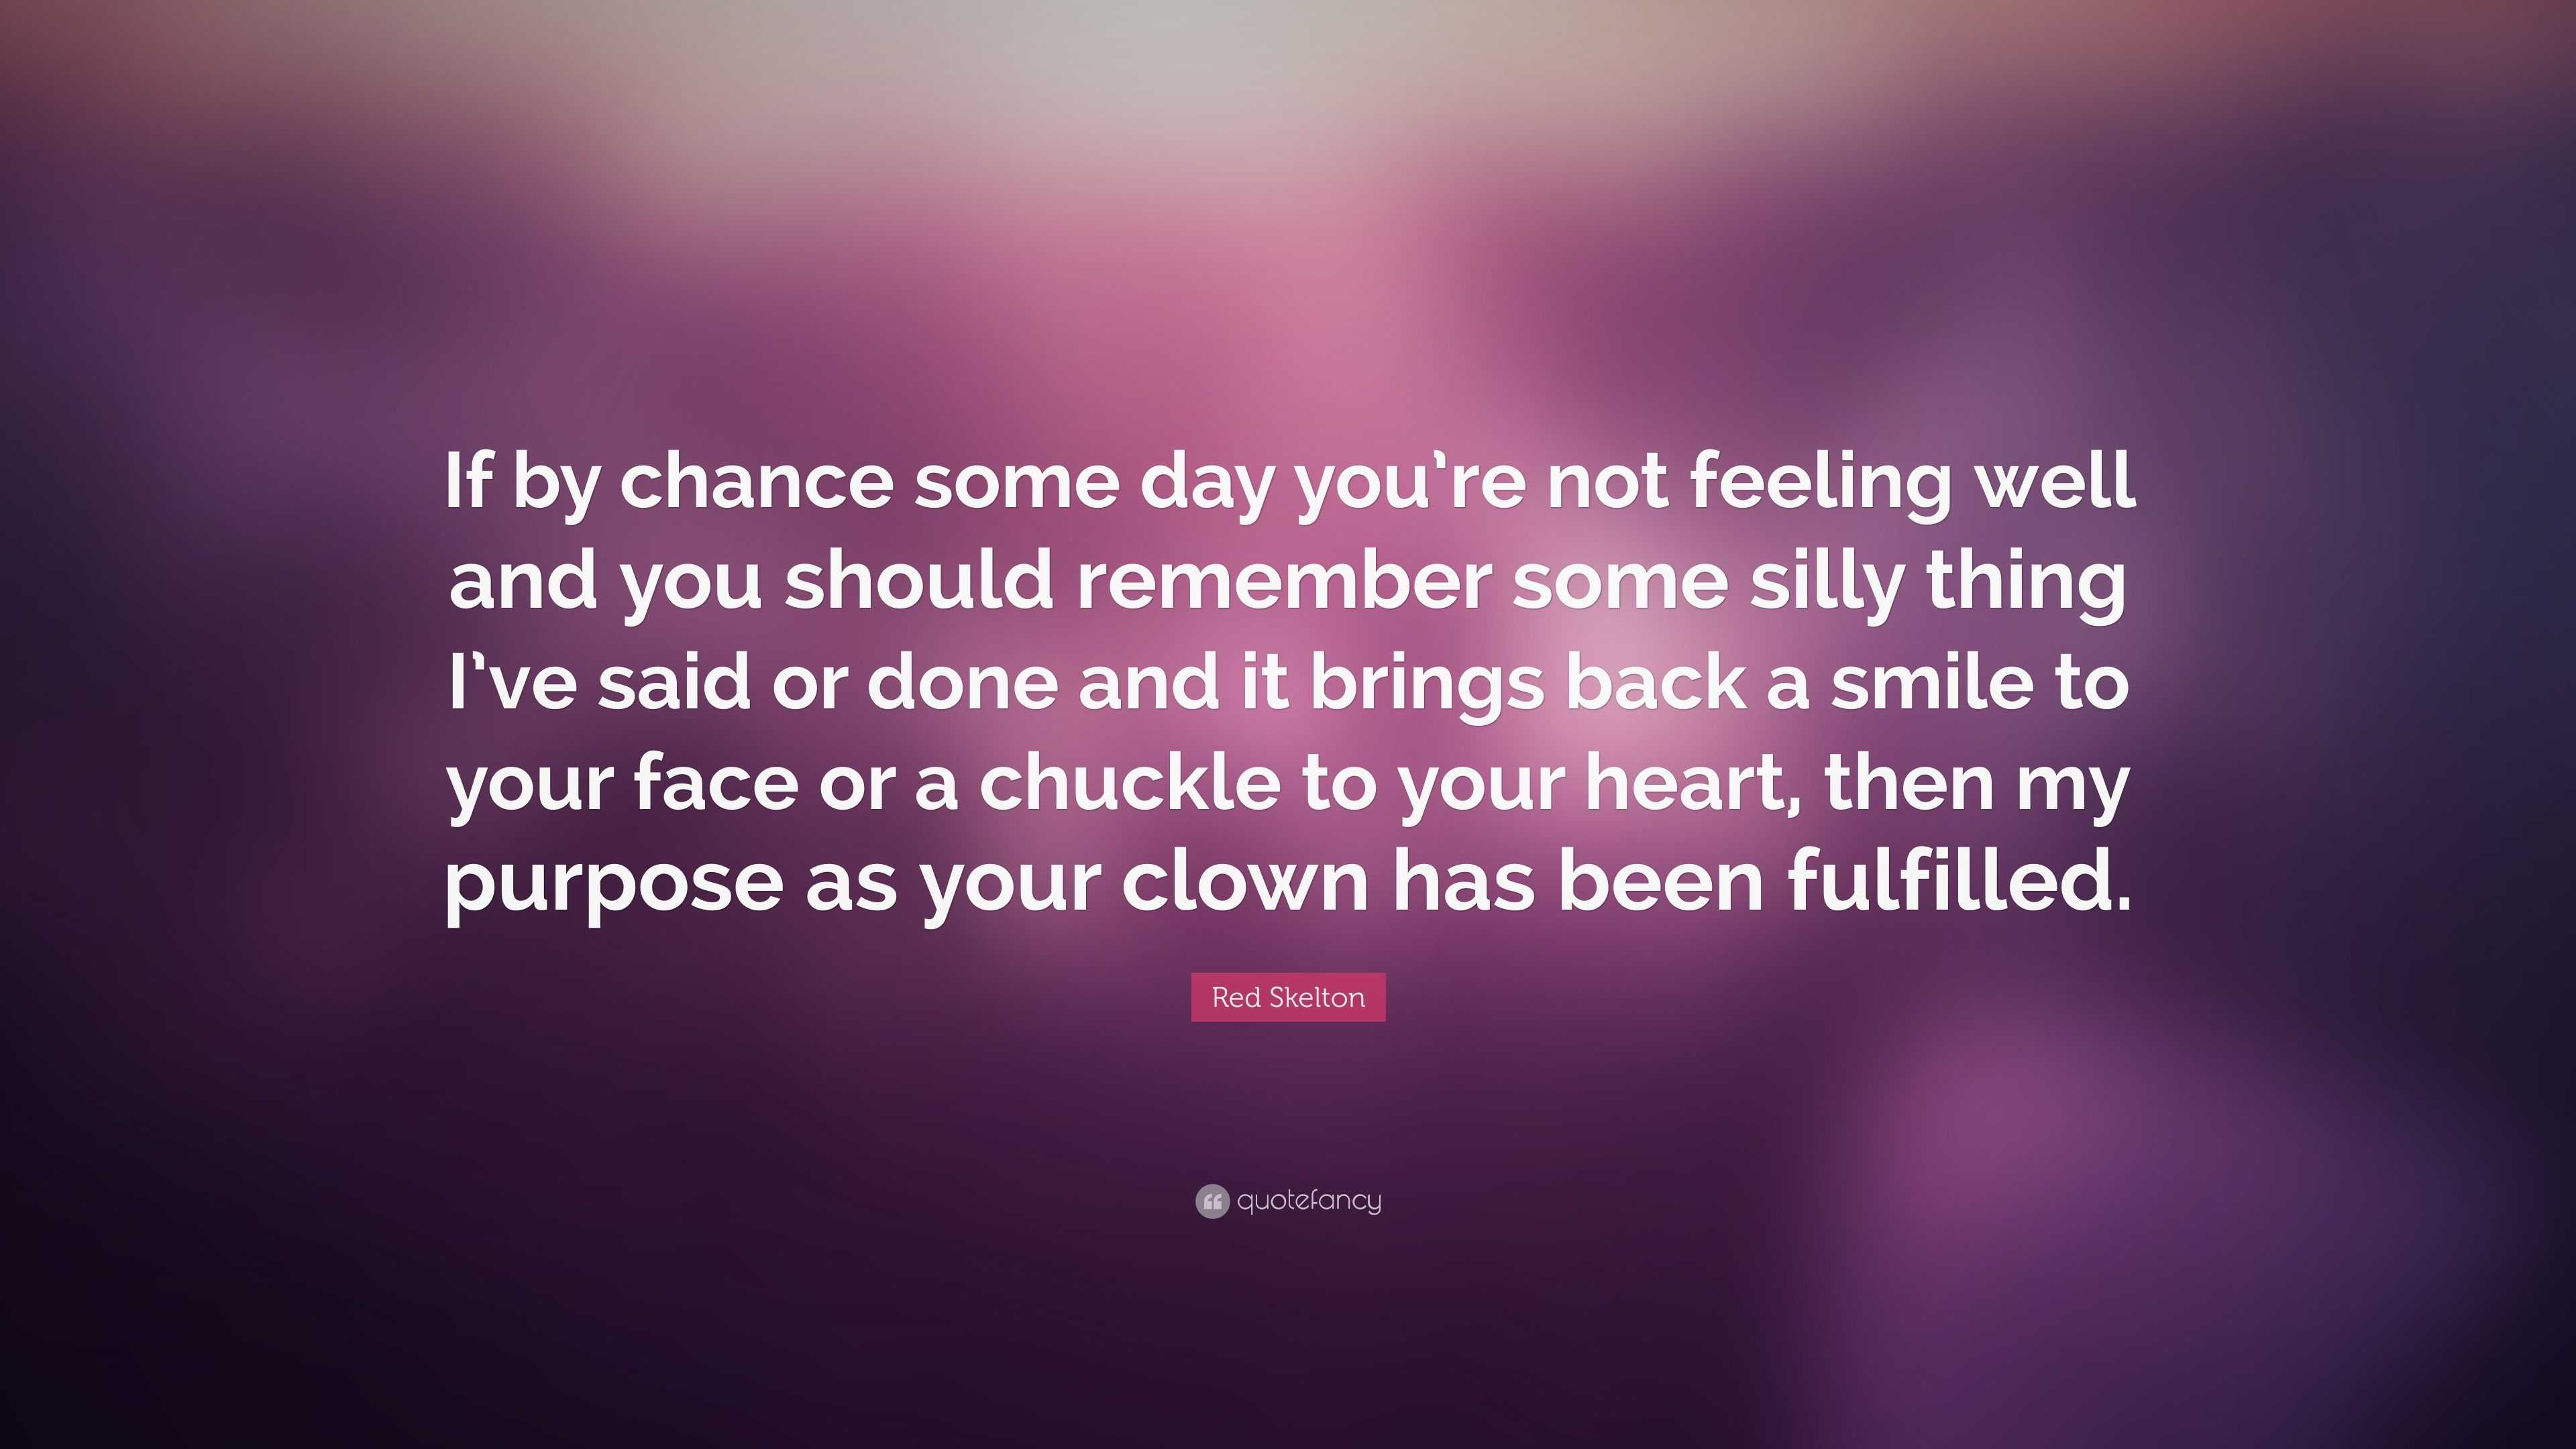 Red Skelton Quote: “If by chance some day you’re not feeling well and ...